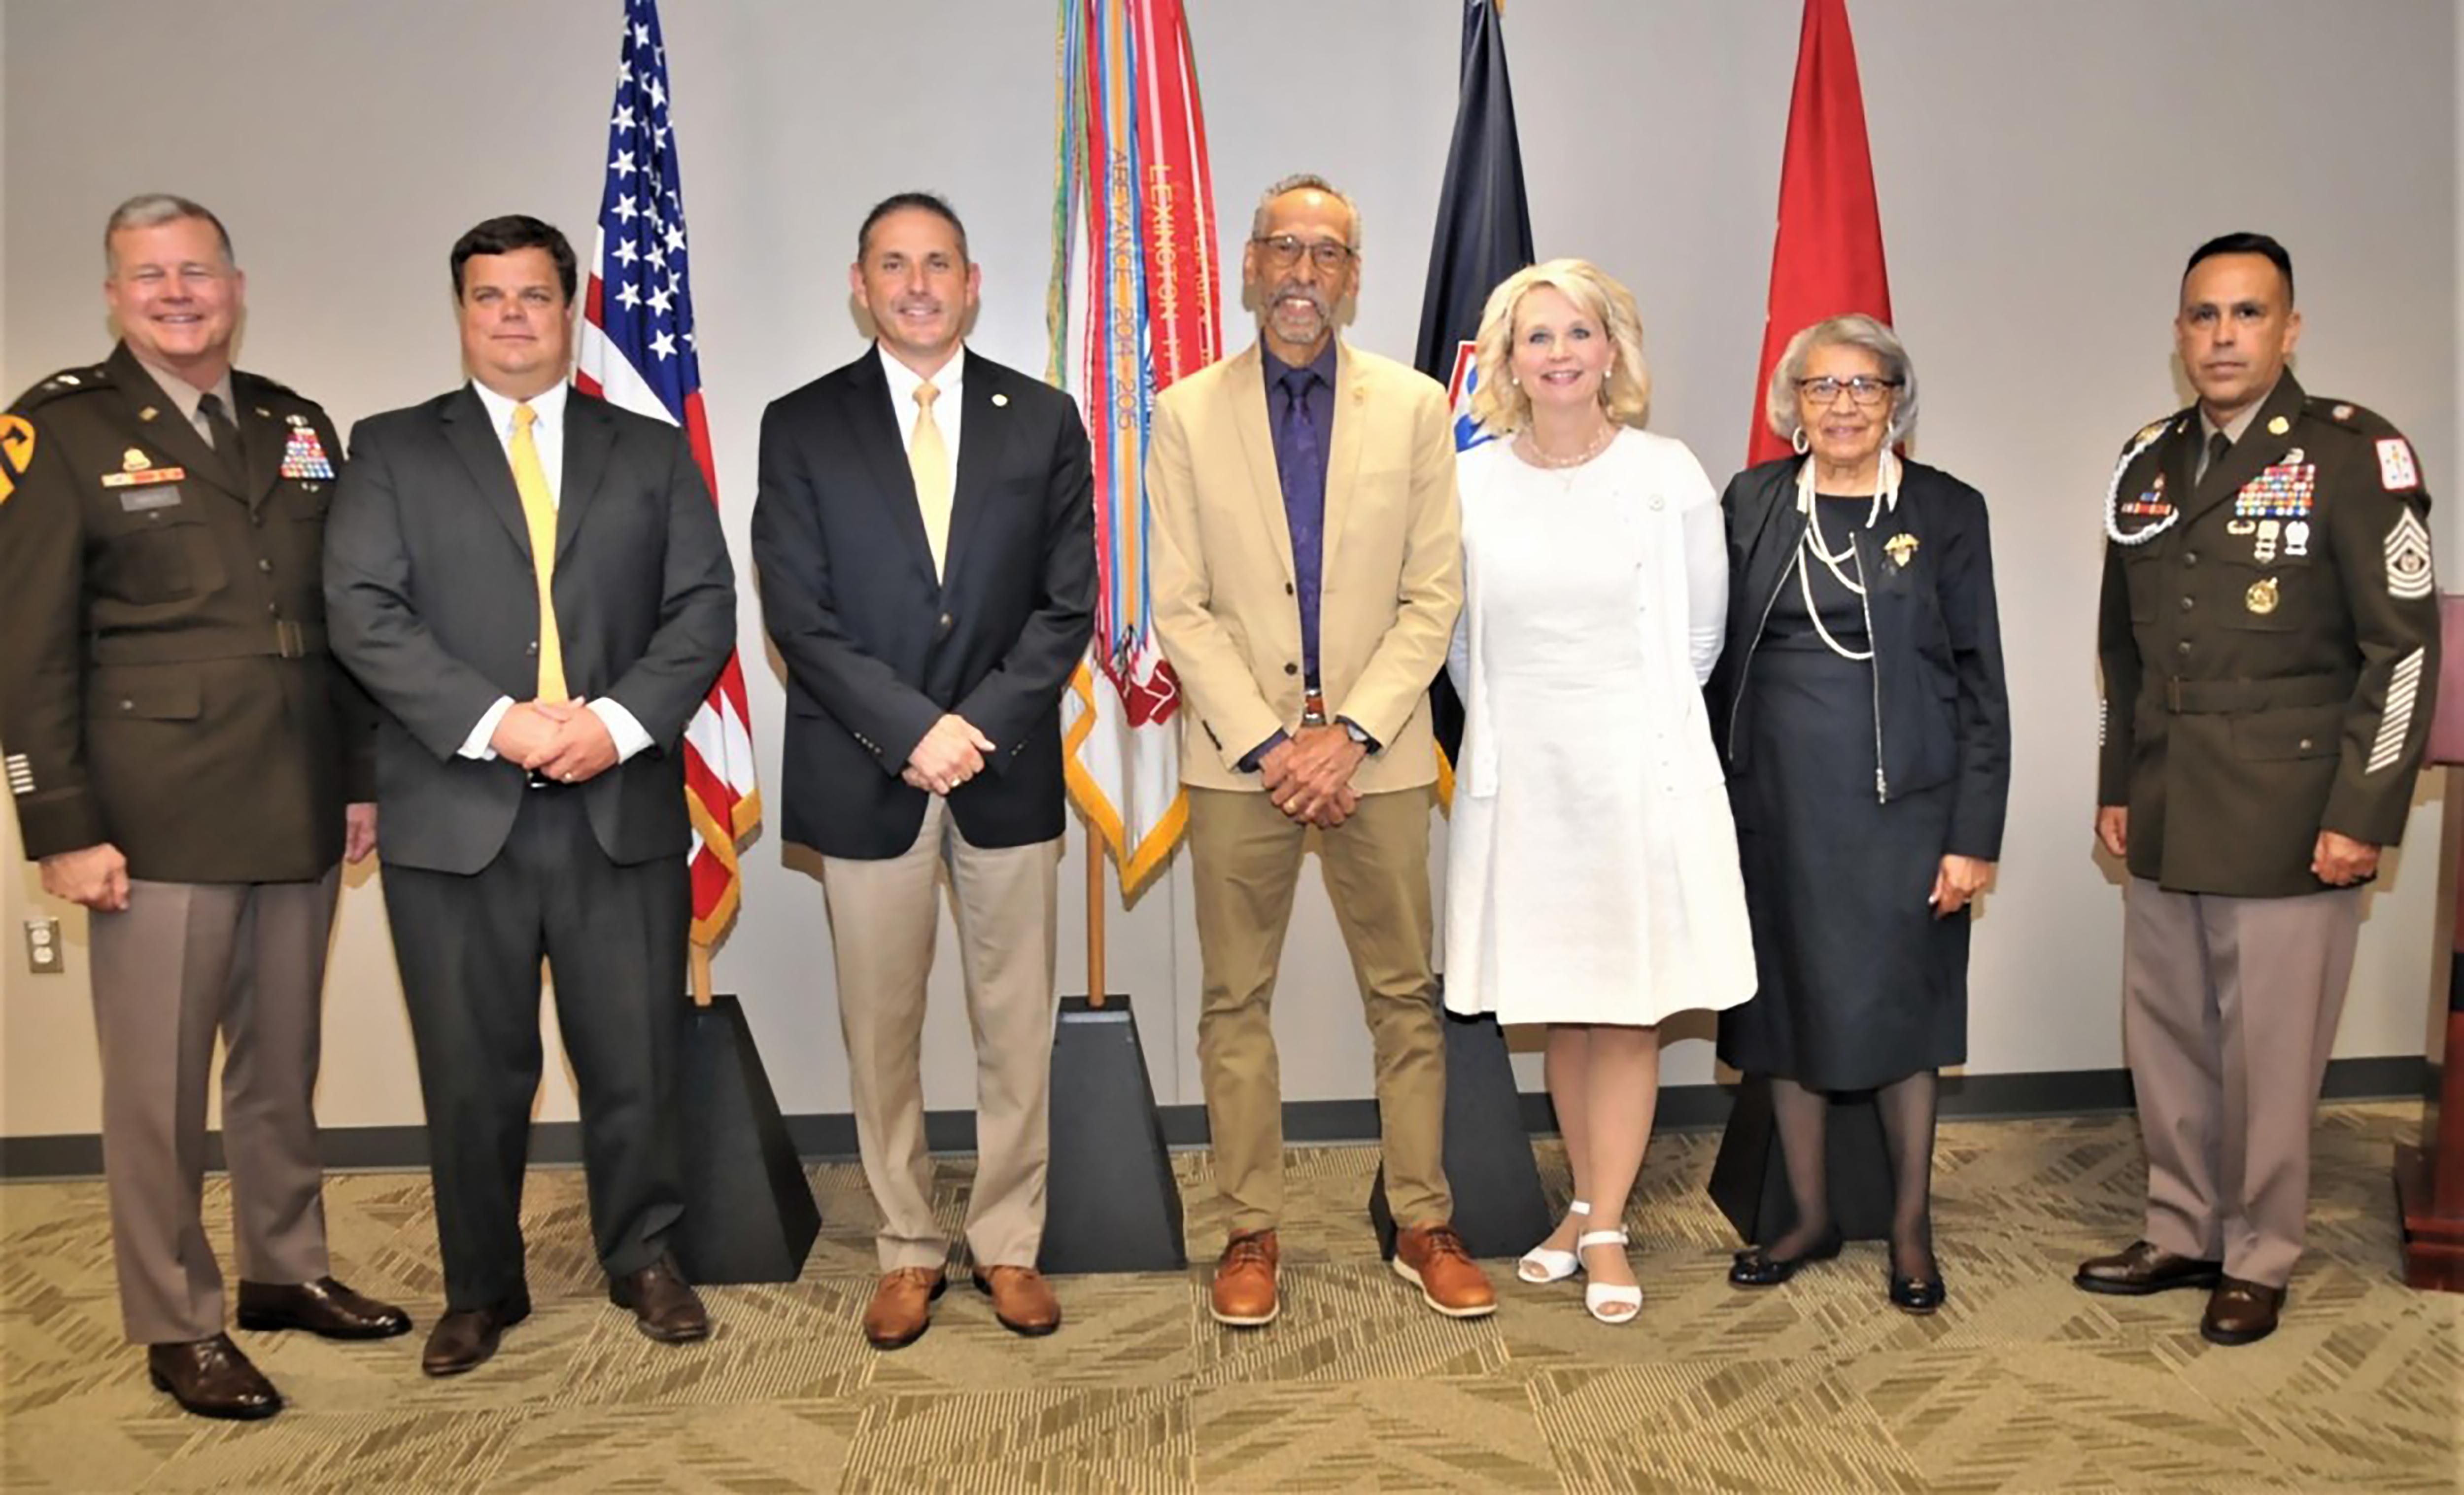 The Good Neighbor Award recipients are honored by Fort Lee's leadership.